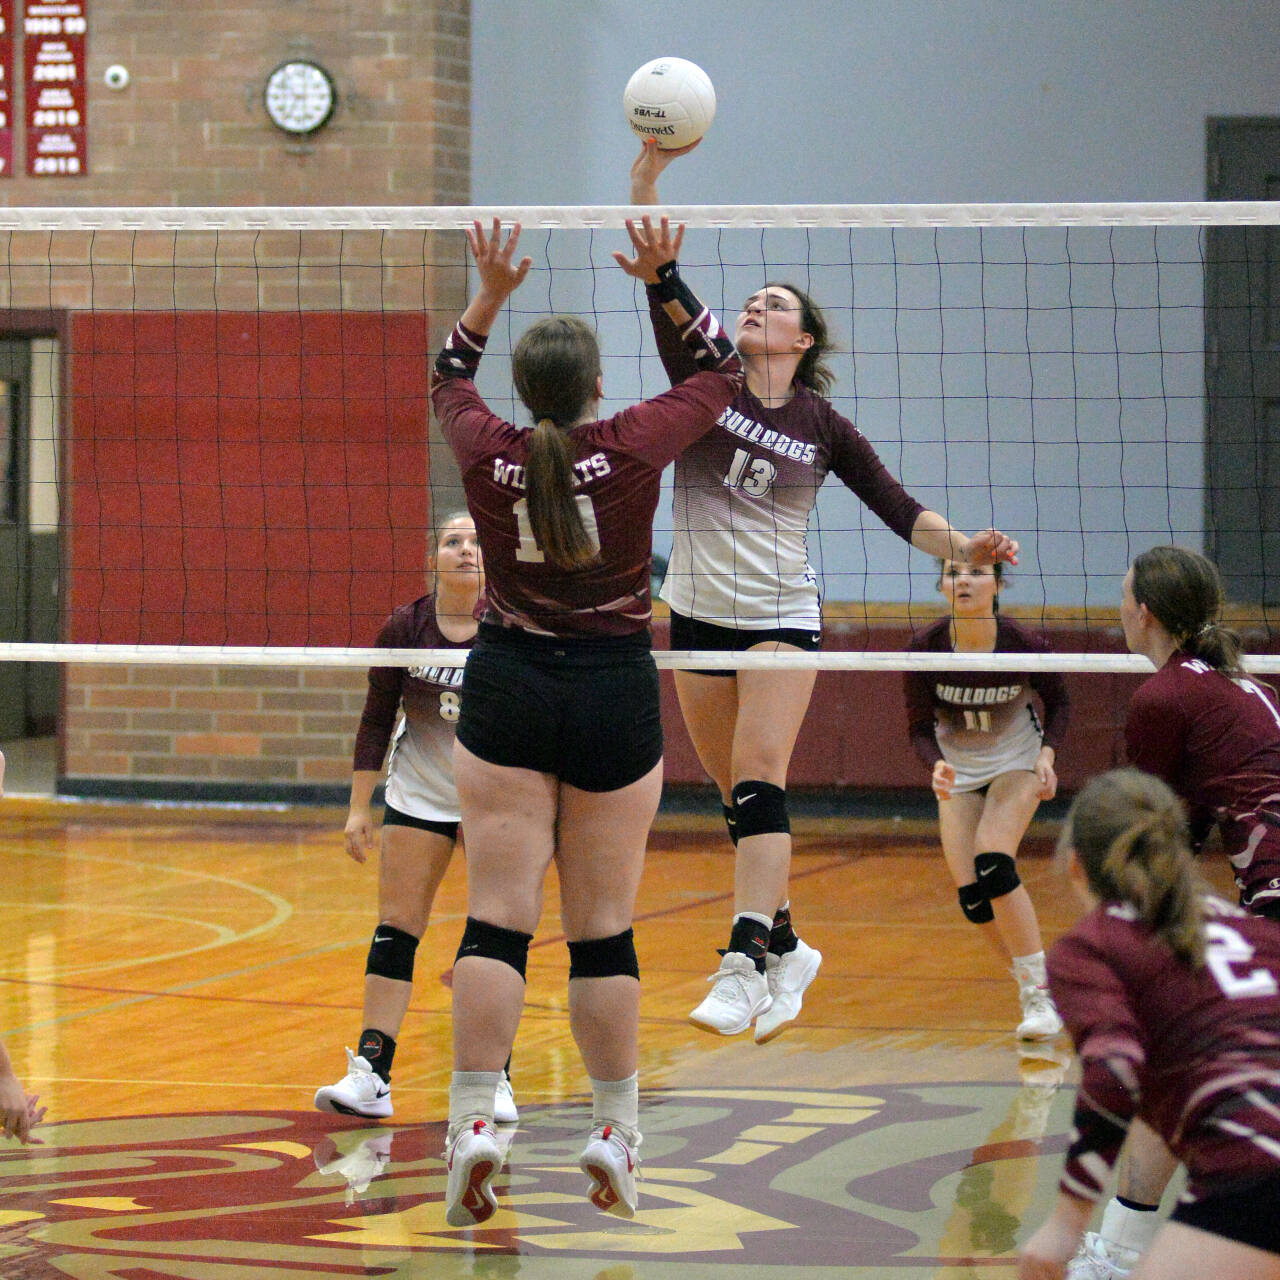 RYAN SPARKS | THE DAILY WORLD Montesano middle blocker Addie Winter (13) puts up a drop shot against Ocosta’s Alexia Bradley during the Bulldogs’ 3-0 win in a non-league match on Wednesday in Montesano.